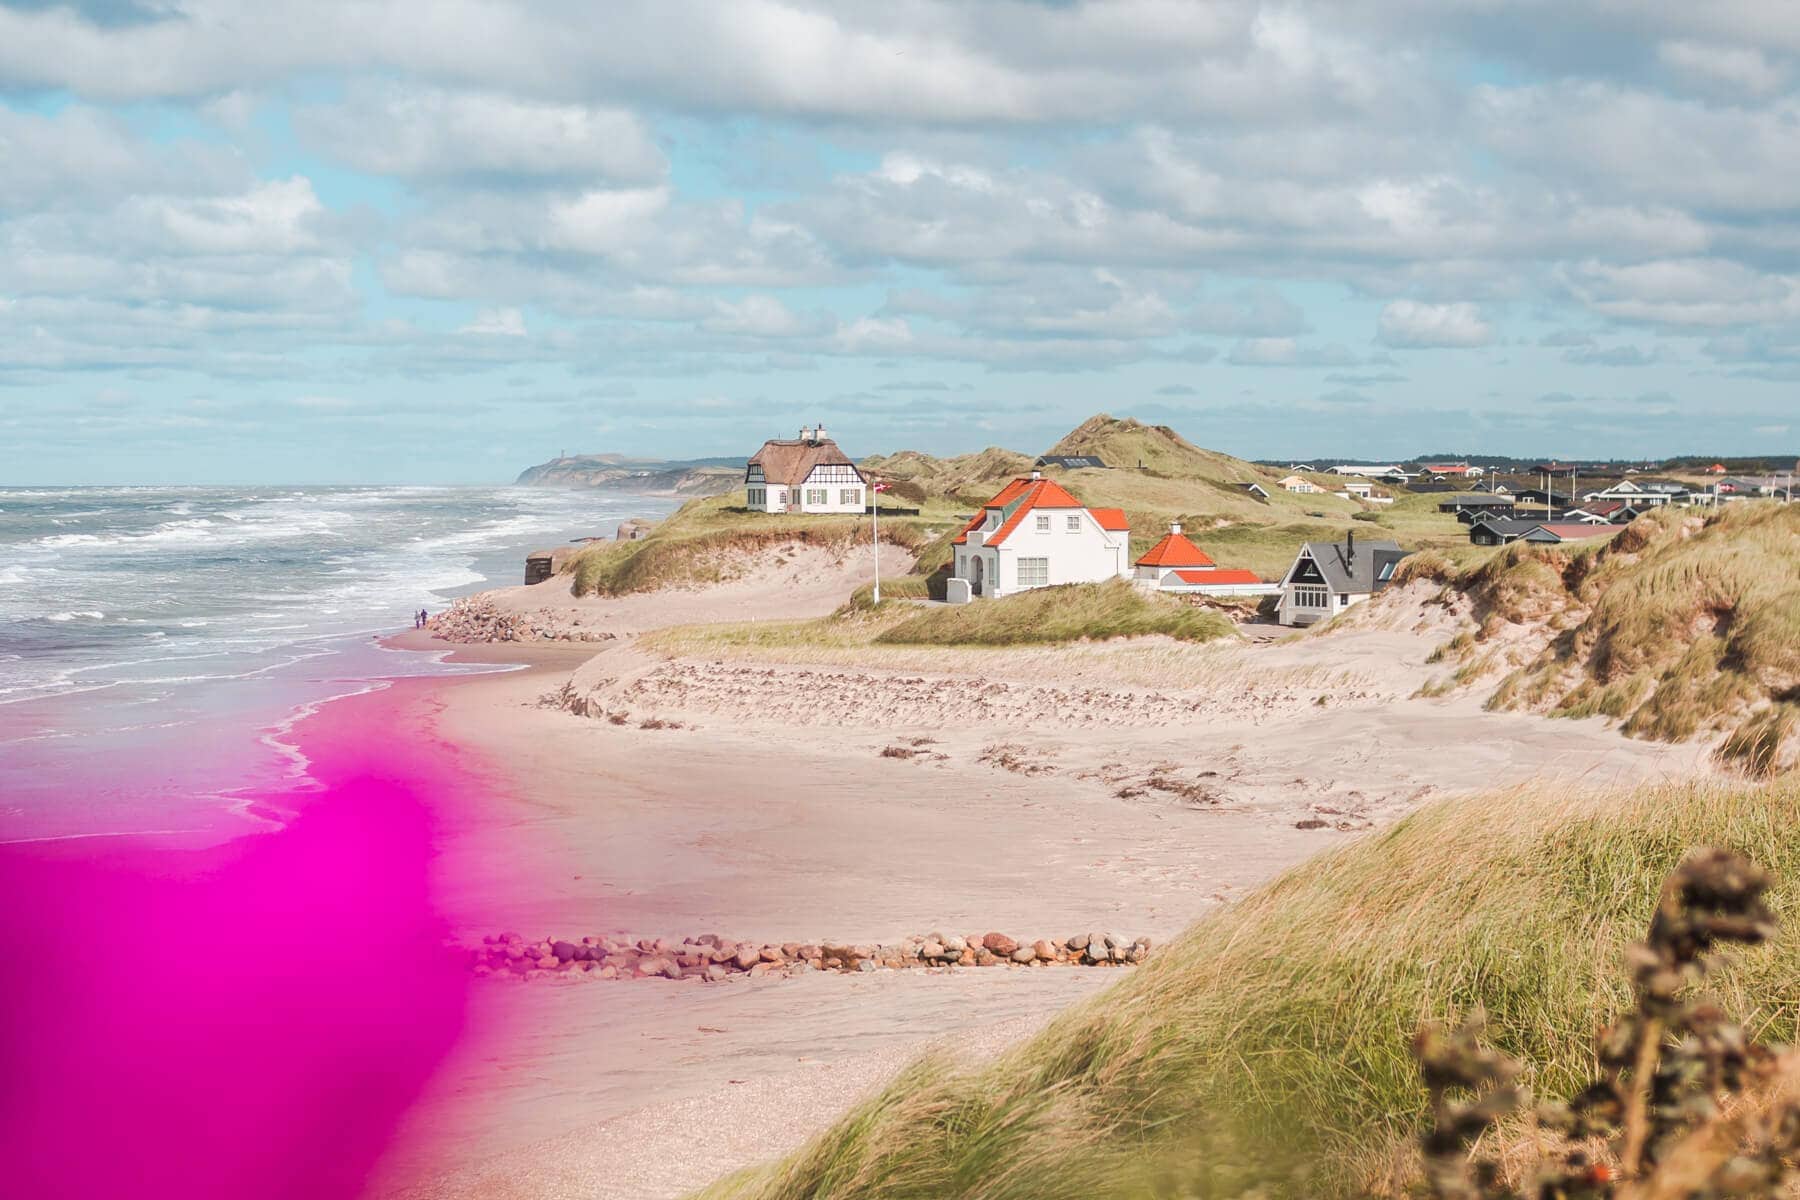 The Ultimate Denmark Bucket List. 101 awesome things to do - View of two houses on Lokken Beach